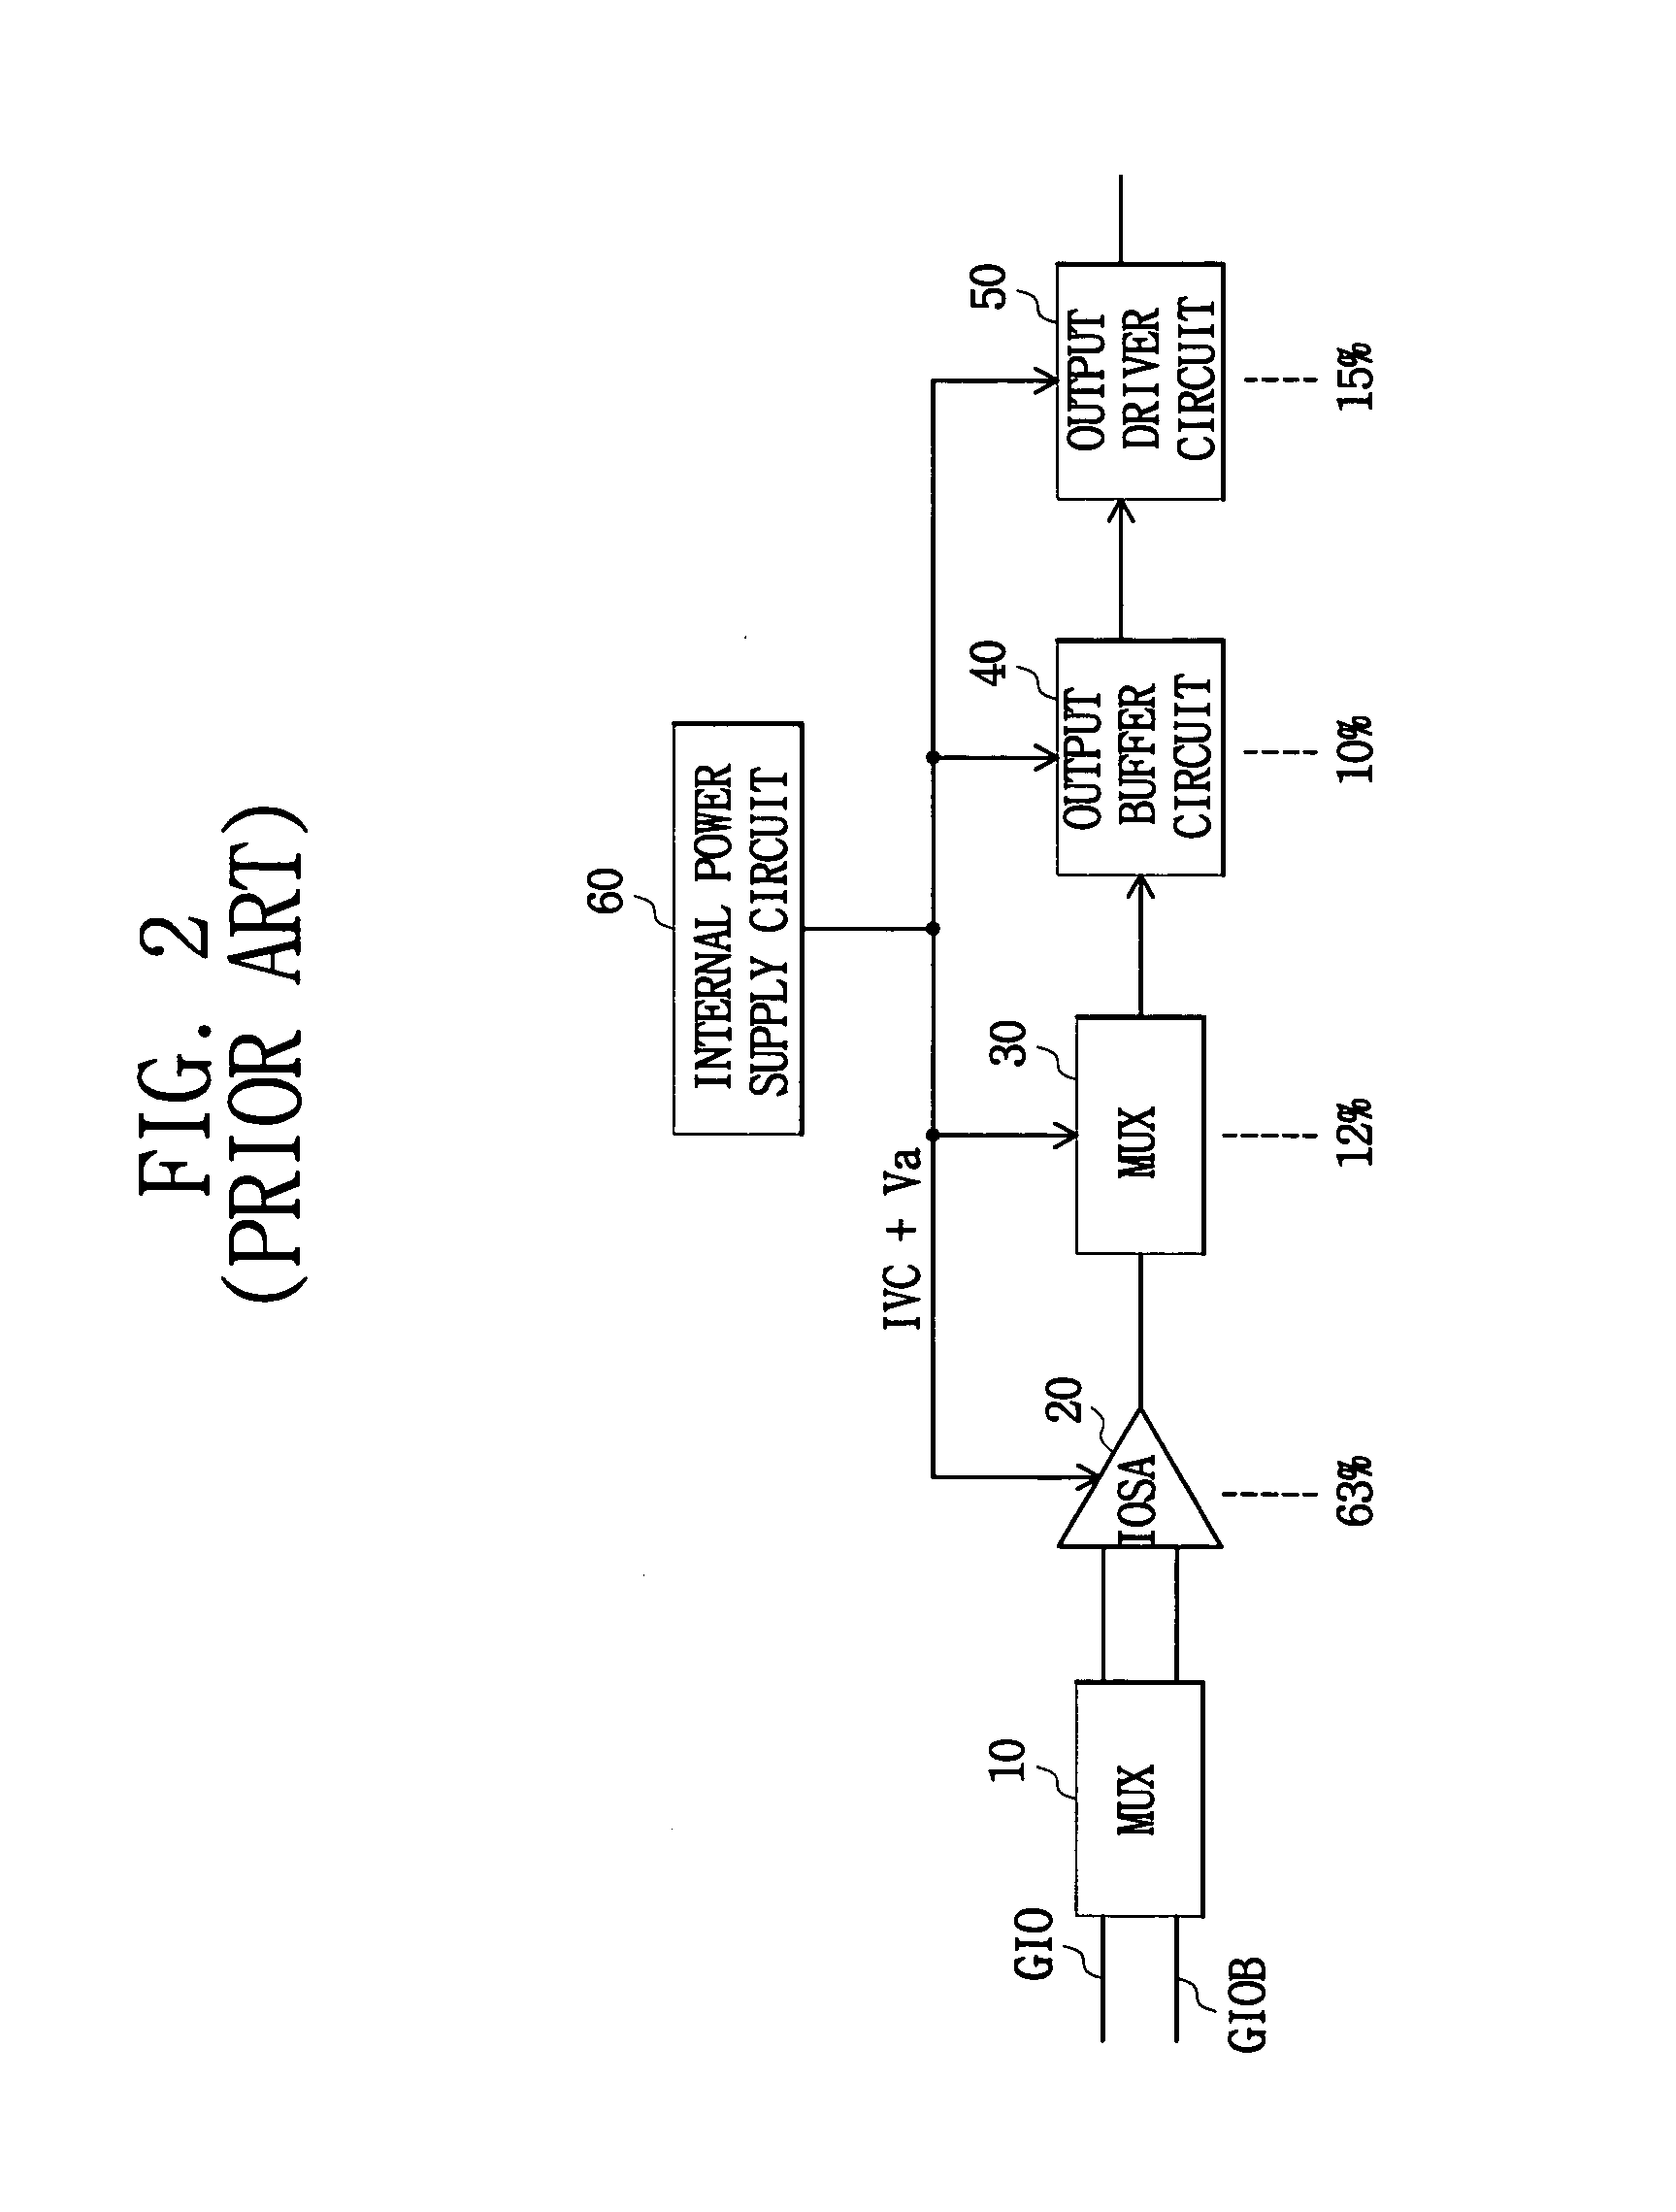 Method and apparatus for increasing data read speed in a semiconductor memory device